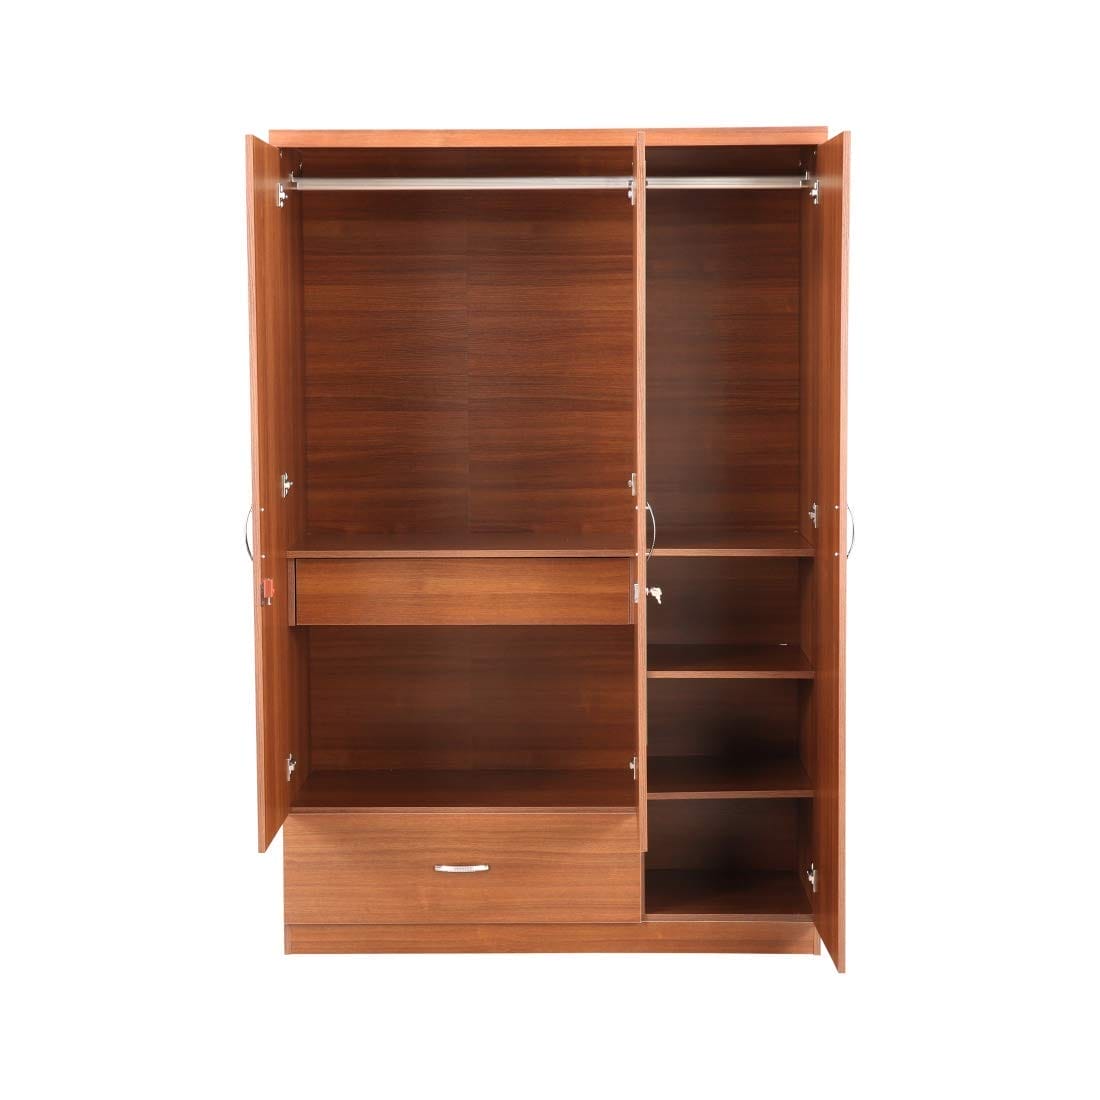 Light Brown 3 Door Wardrobe with Drawers, Shelves and Hanging Space for Clothes | Wardrobe for Clothes